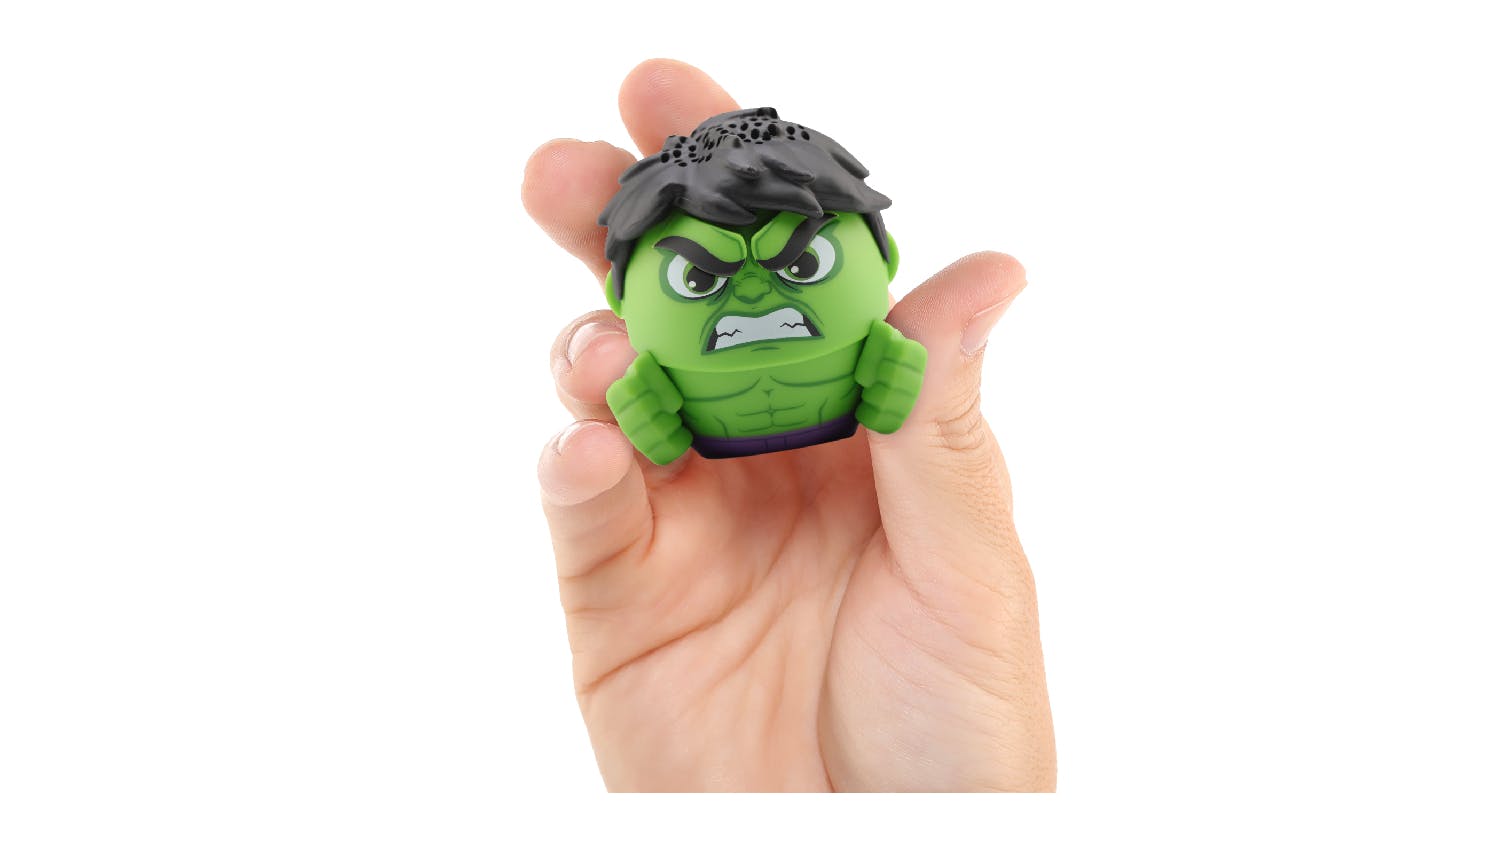 Bitty Boomers 2" Novelty Portable Bluetooth Speaker - The Incredible Hulk